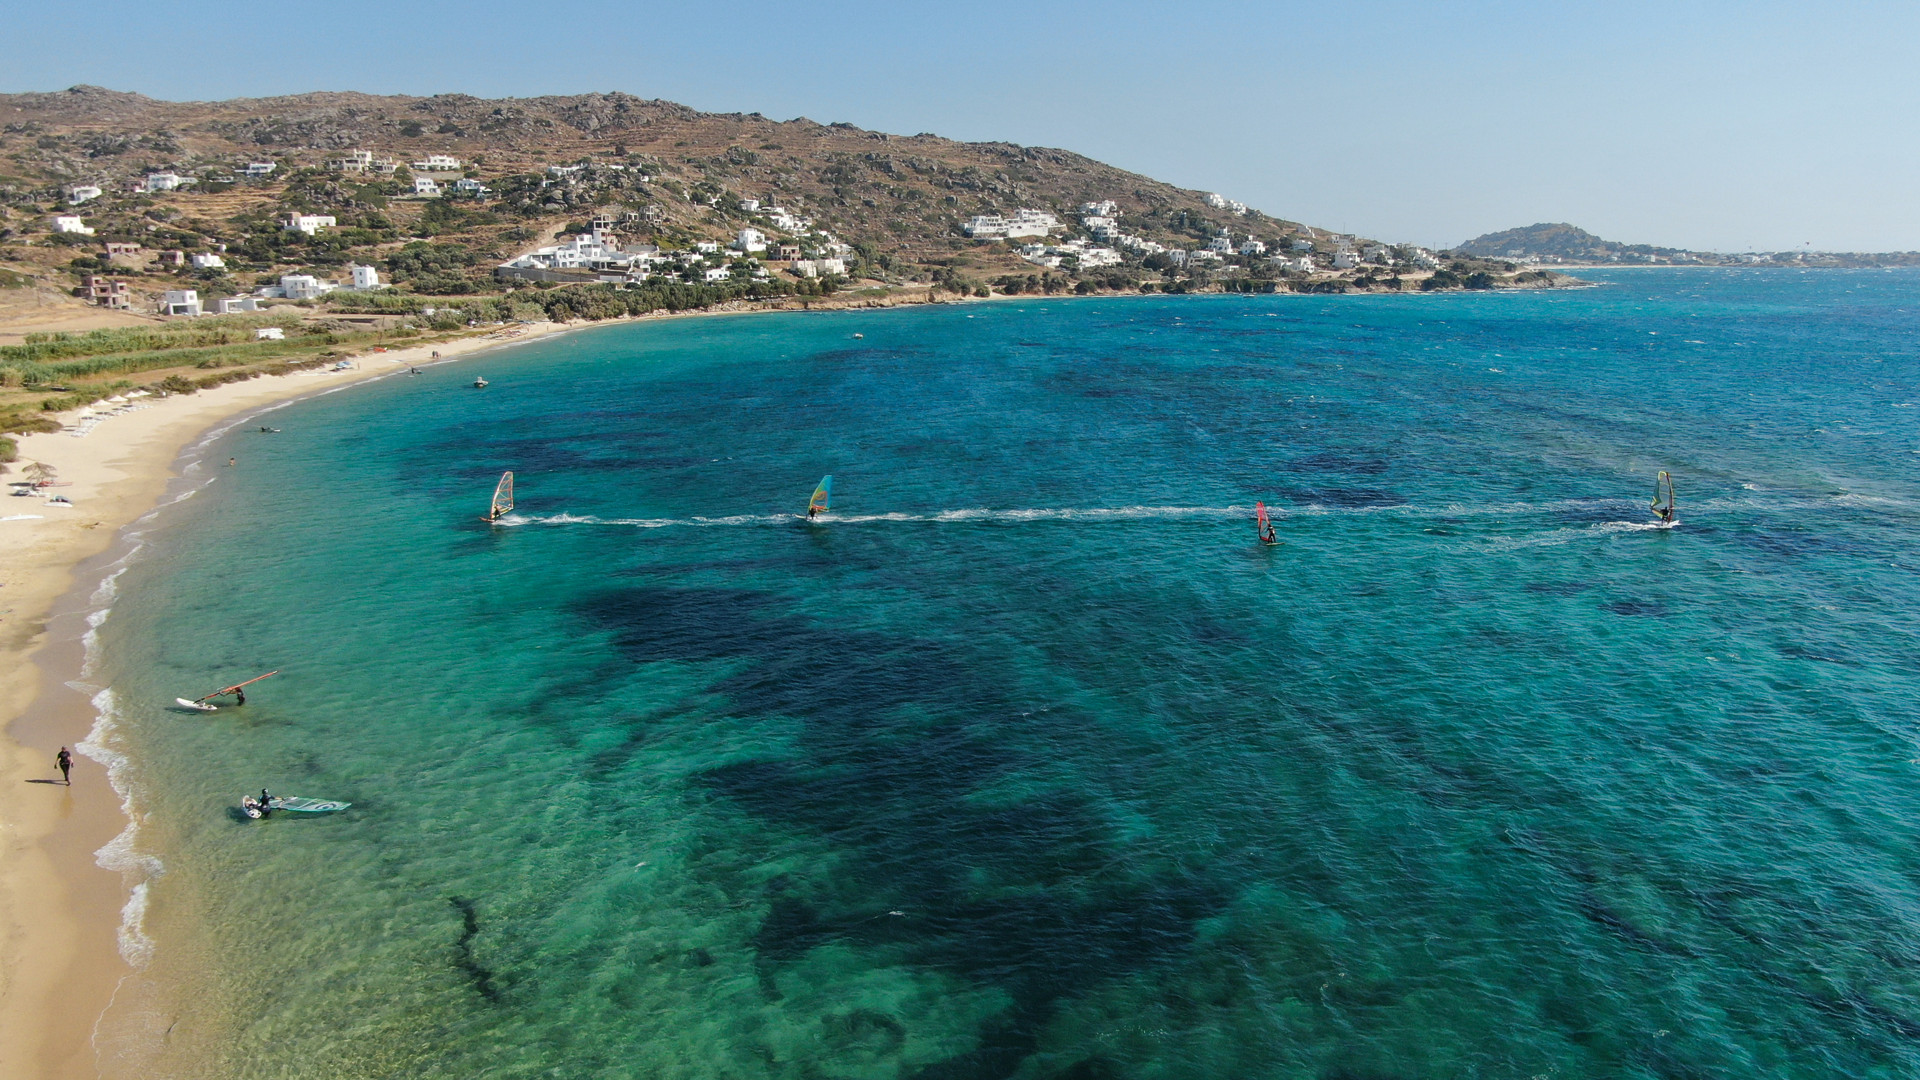 Wind, shallow water & golden sand … the dream combination for windsurfers in Naxos